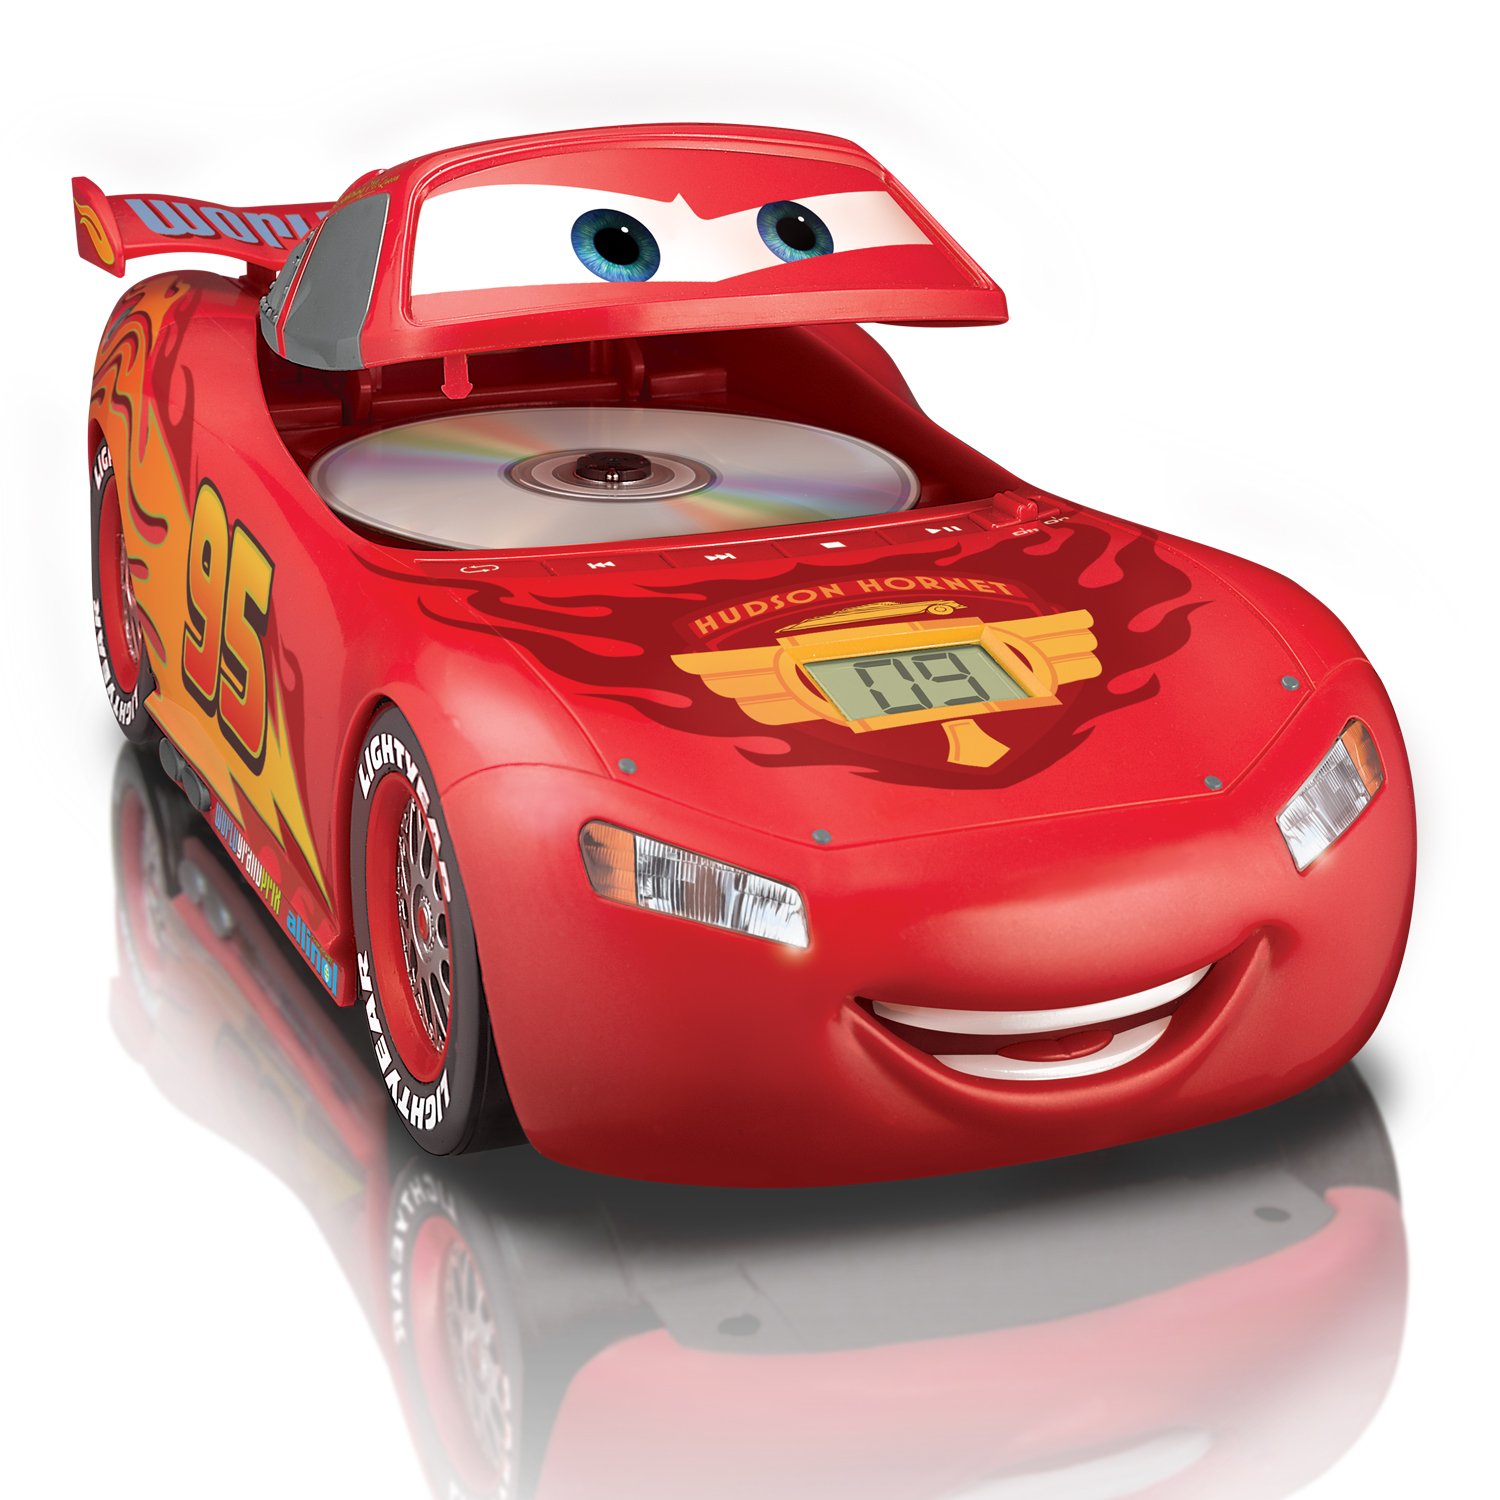 Daily Pixar Cars Facts on X: Pixar cars fact #106: there's a